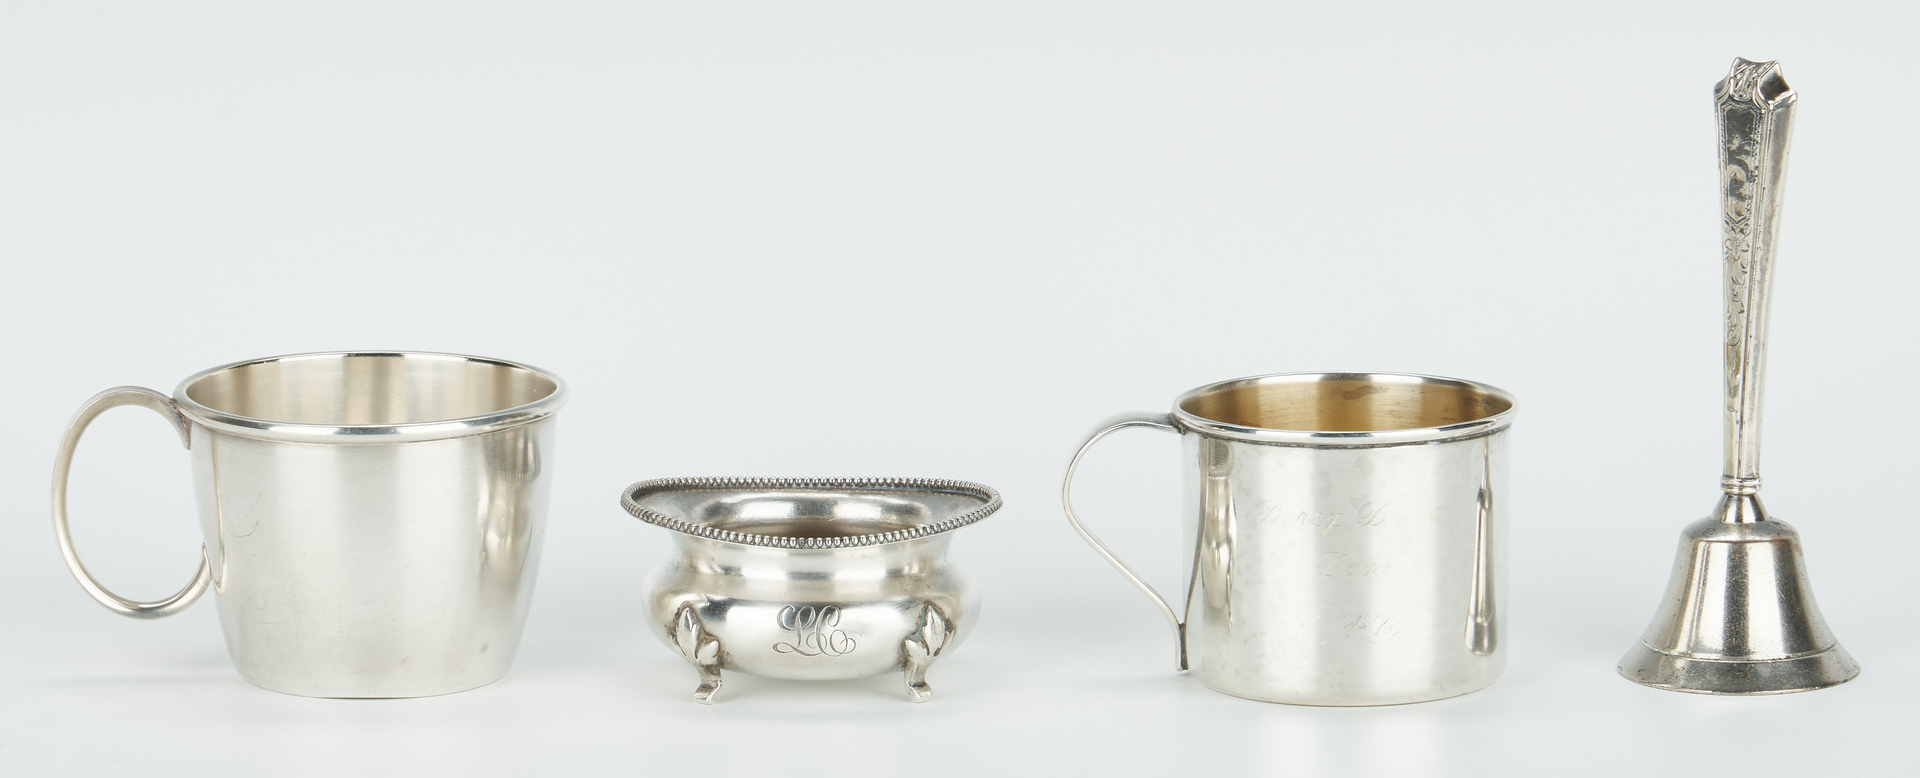 Lot 745: Grouping 24 Sterling Silver Items, incl. Holloware